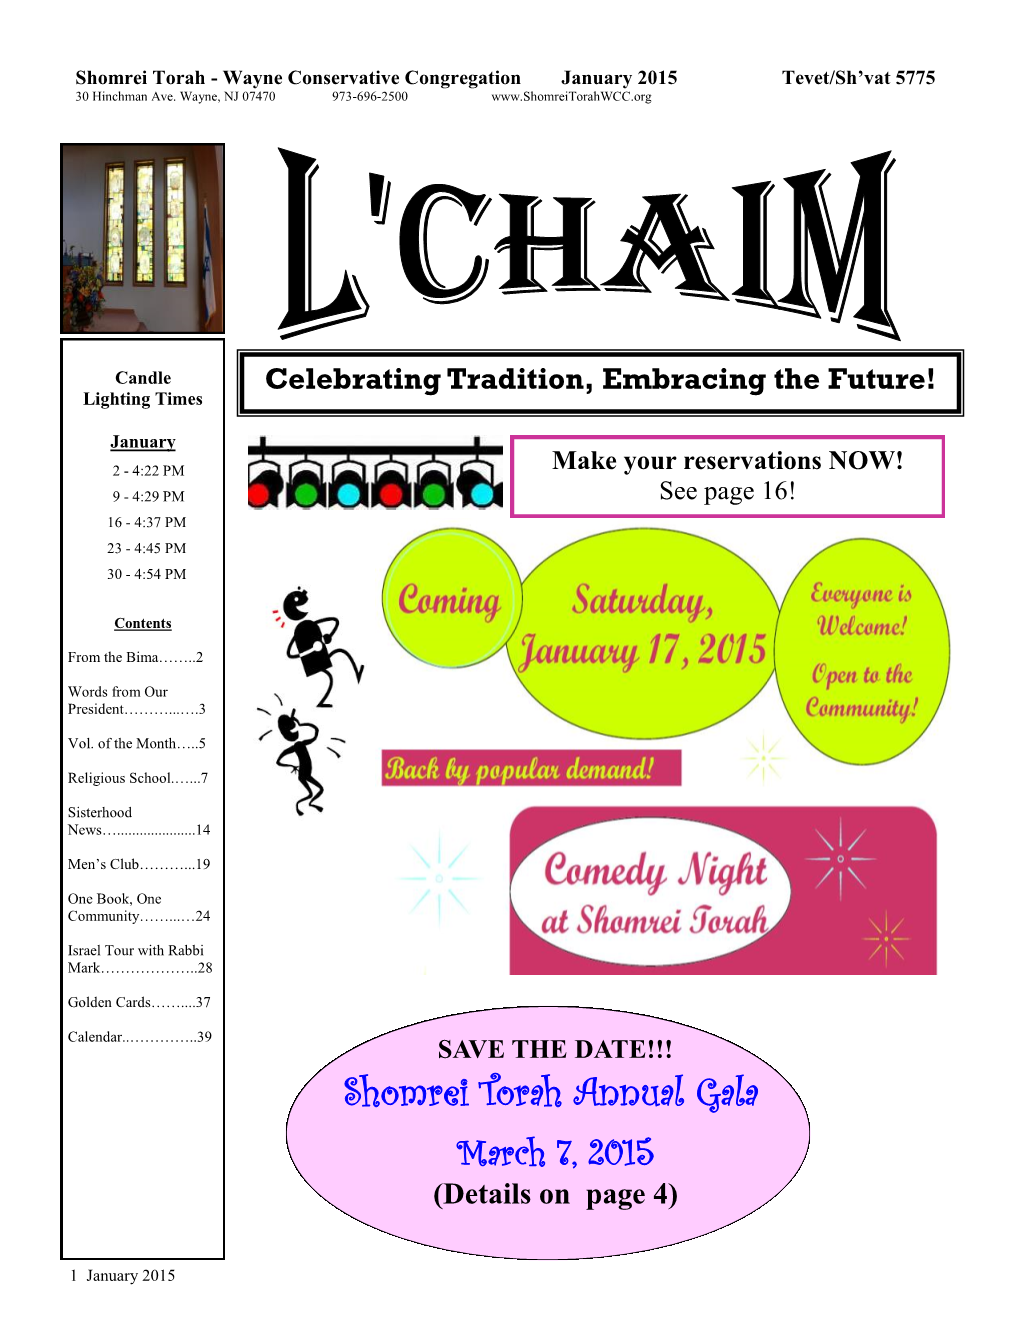 Shomrei Torah Annual Gala March 7, 2015 (Details on Page 4)